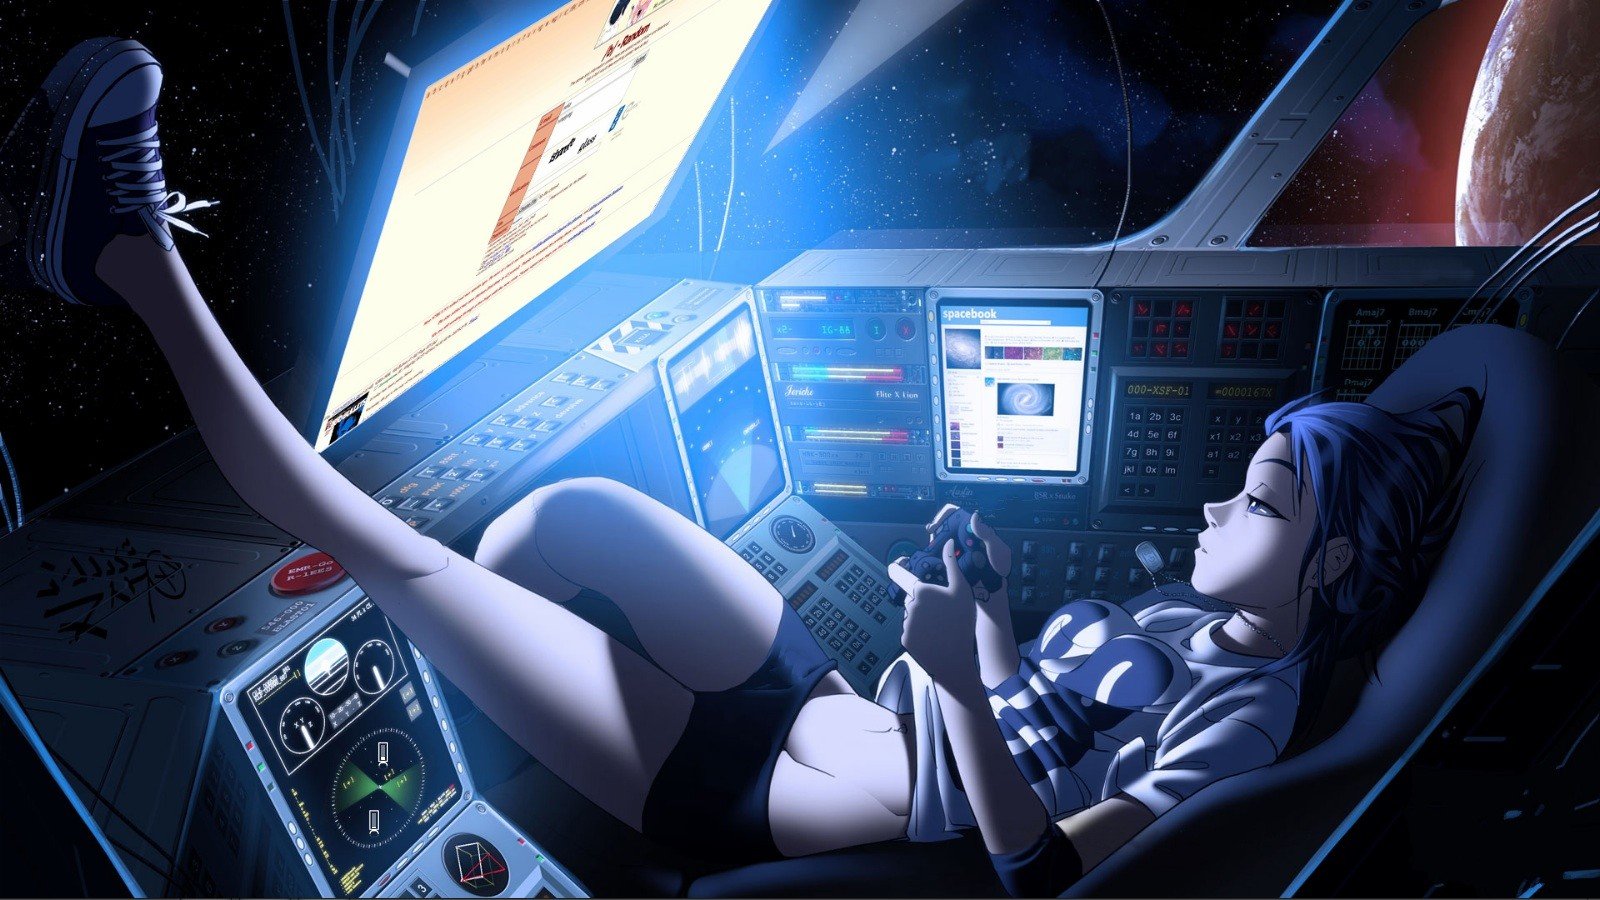 women, Vashperado, Belly, Artwork, Anime, Video games, 88 Girl, Drawing,  Futuristic, Space, Space station, Colorful, Anime girls, PlayStation 3,  Space Invaders, Spaceship, Zero gravity, Cockpit, Controllers HD Wallpapers  / Desktop and Mobile